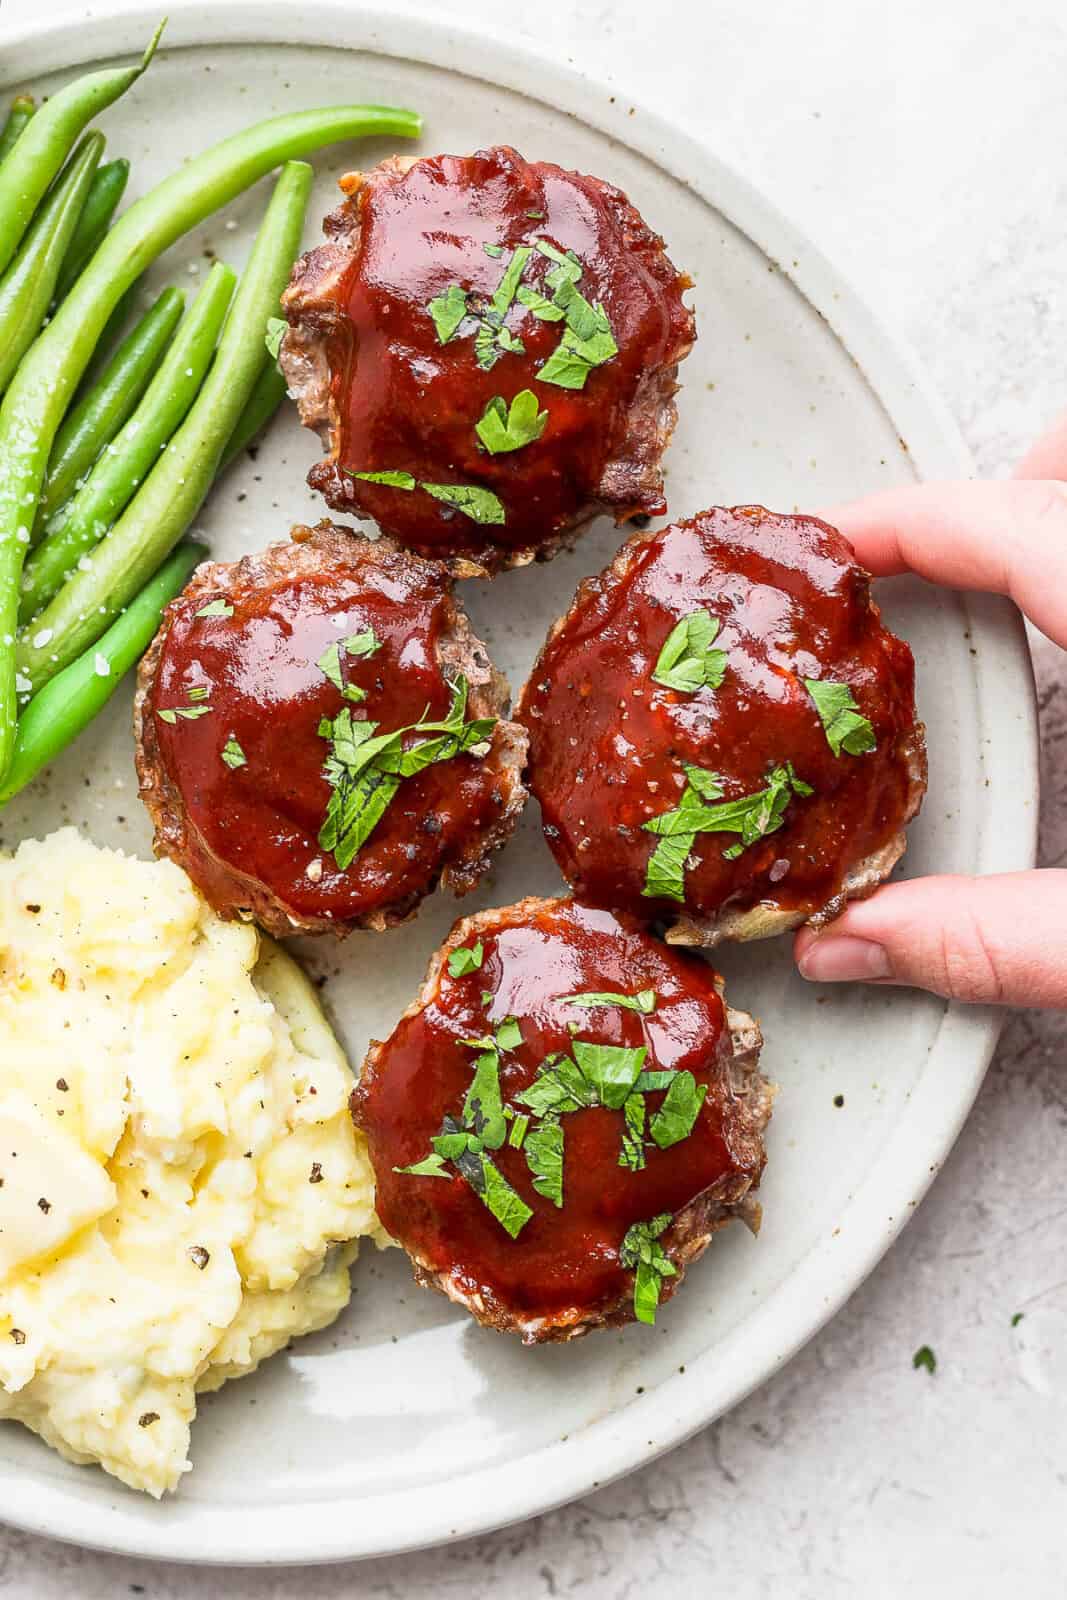 Plate of mini meatloaf muffins with glaze on a plate with mashed potatoes and green beans.